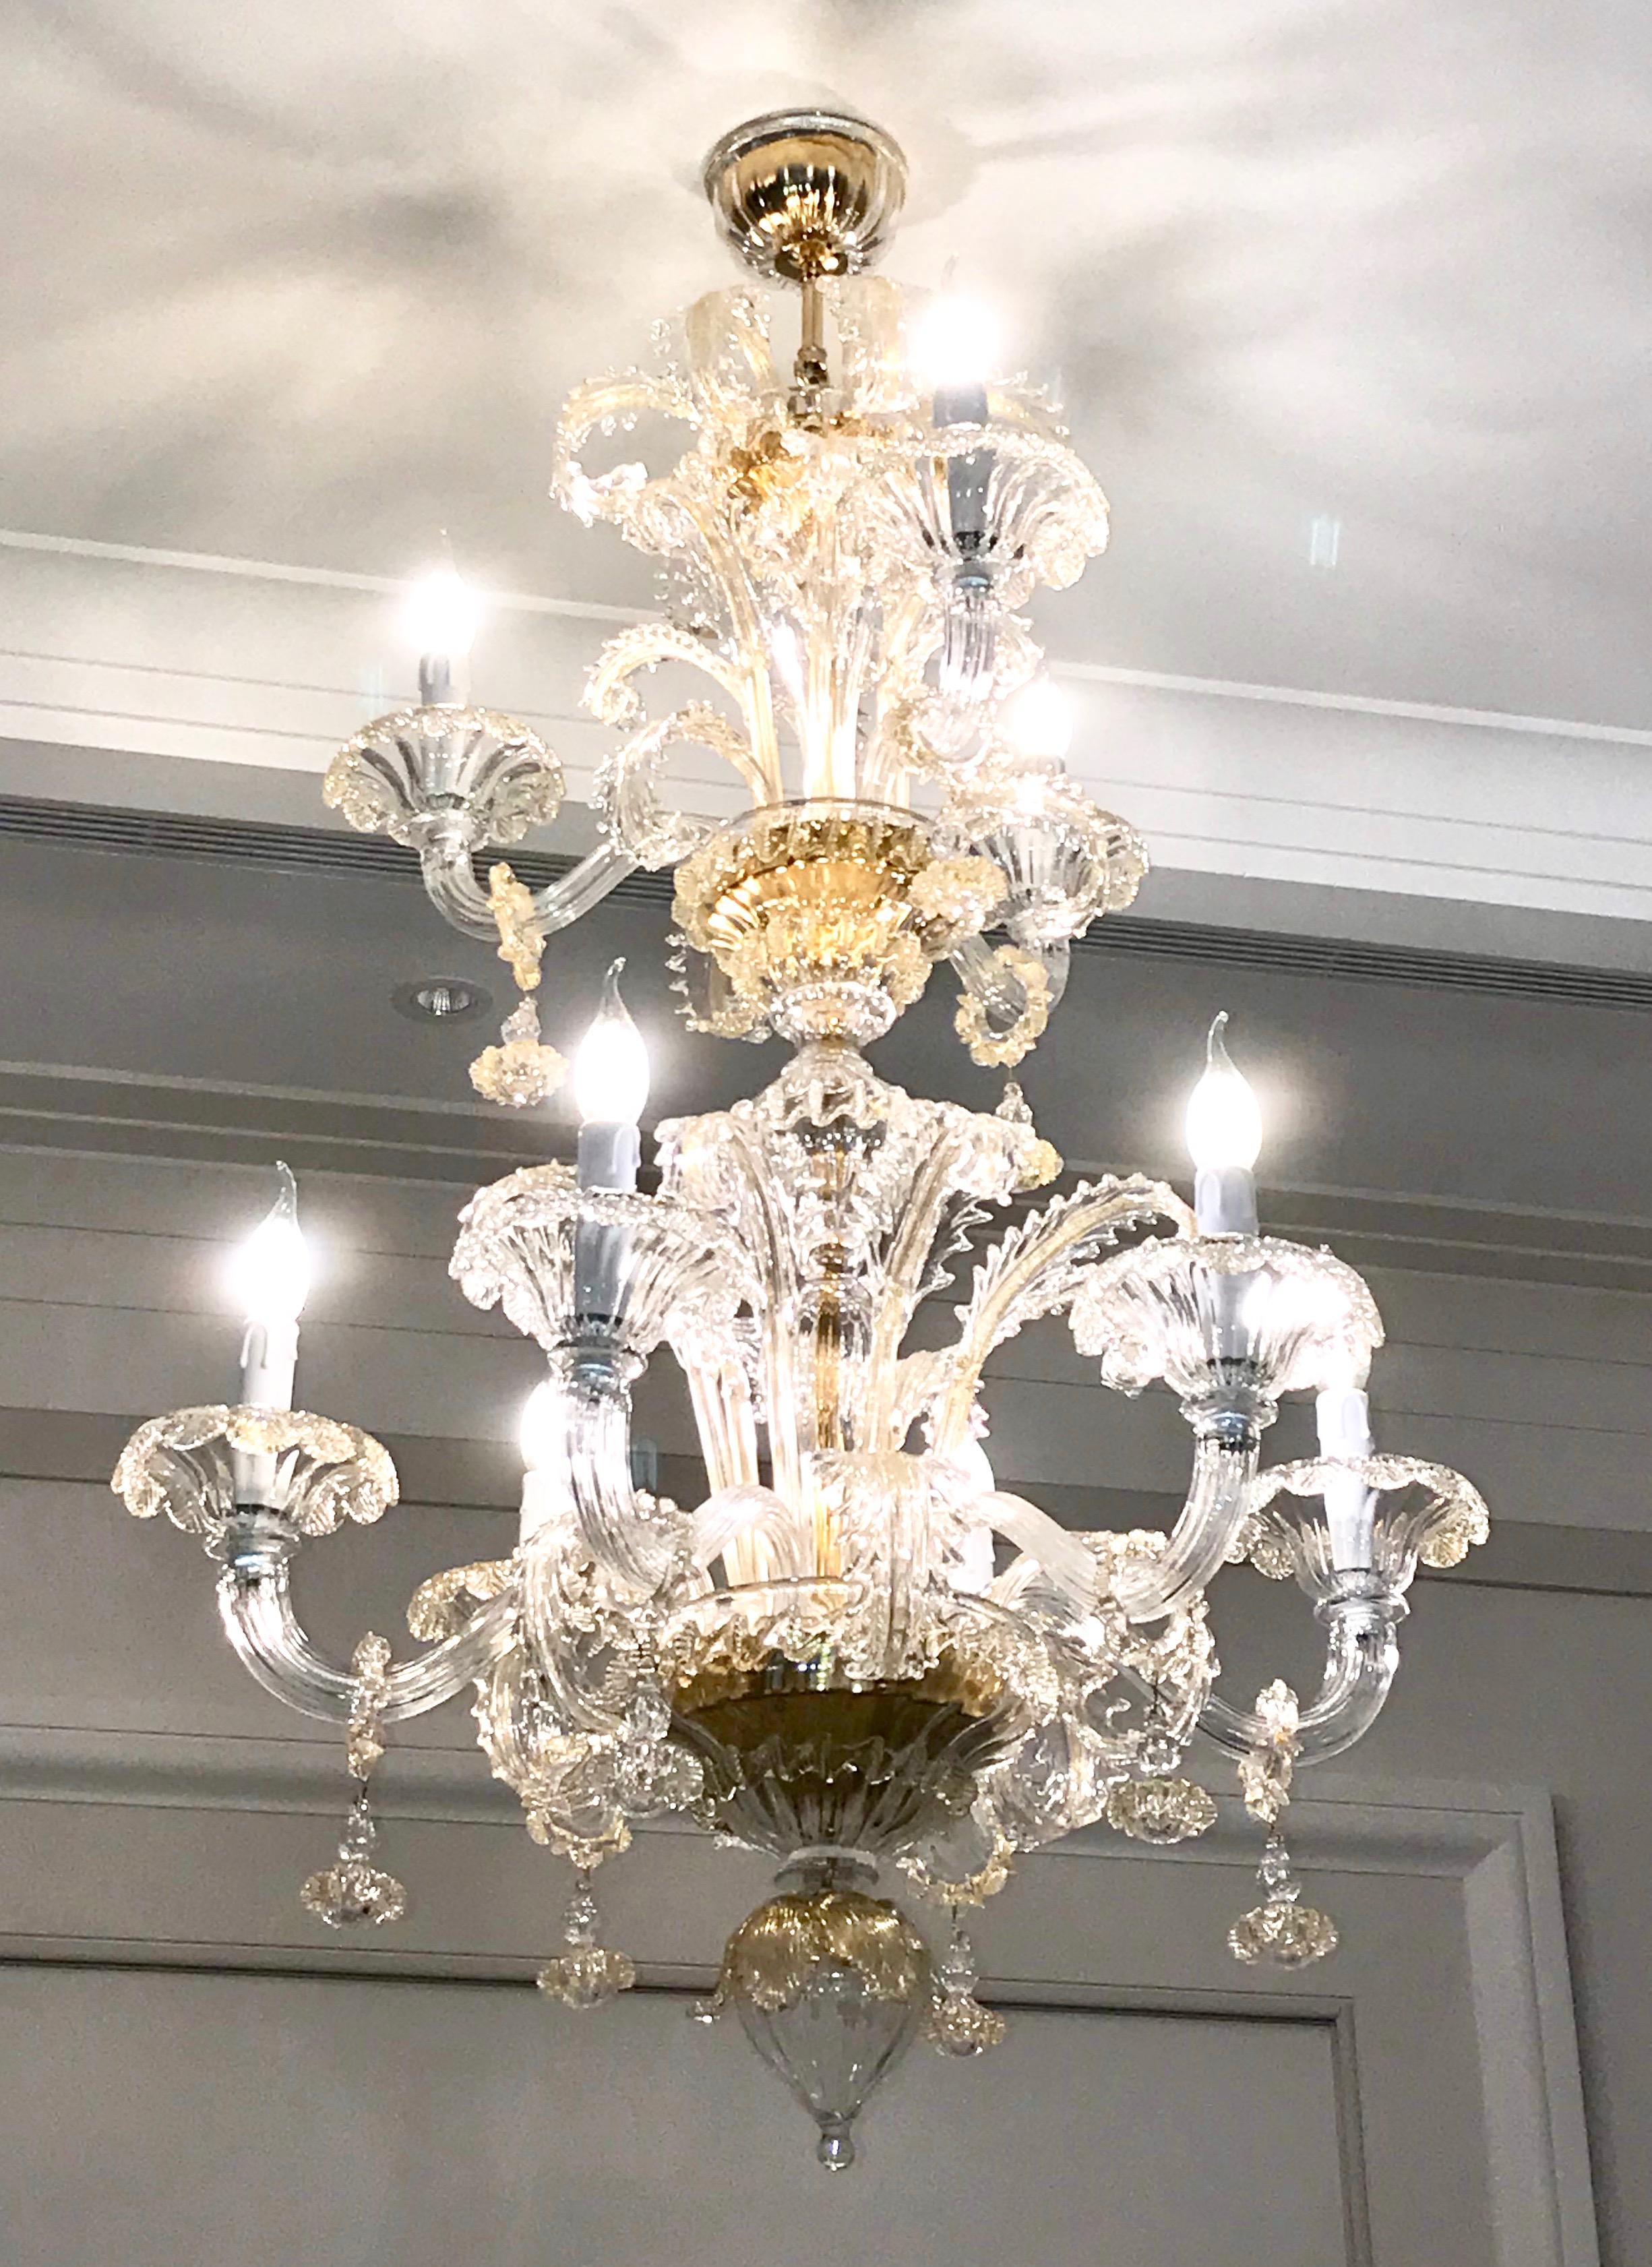 This contemporary Italian chandelier, entirely blown and handcrafted in Italy, in Baroque Rezzonico style, is a high-quality Art Work, in crystal clear Murano glass highlighted by 24-karat pure gold accents. It is composed of 2 tiers, the lowest one